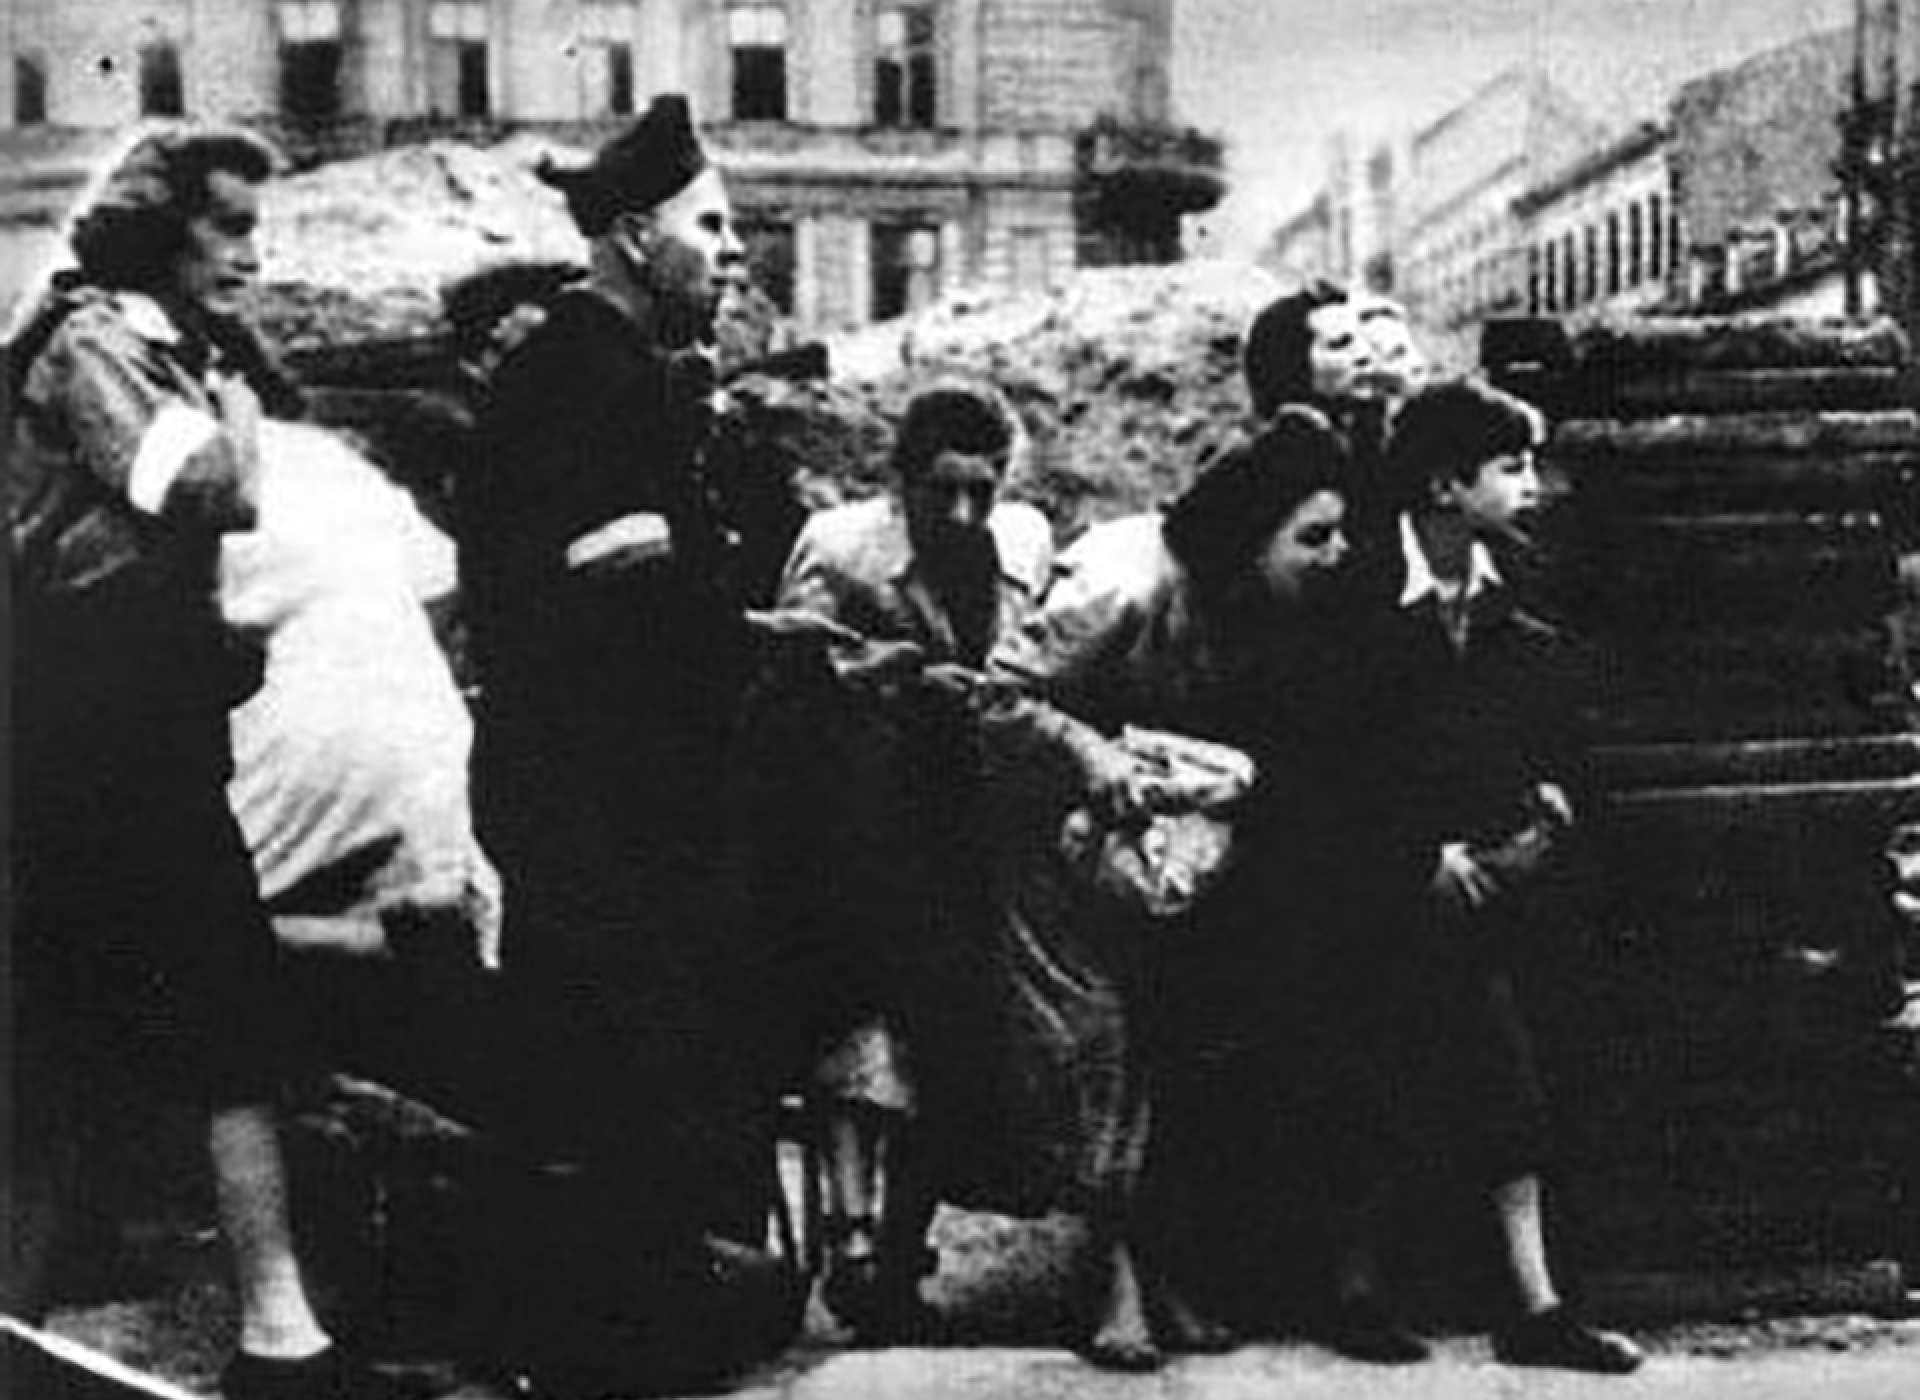 Civilian hide behind make-shift barriers at a street crossing Warsaw Uprising 